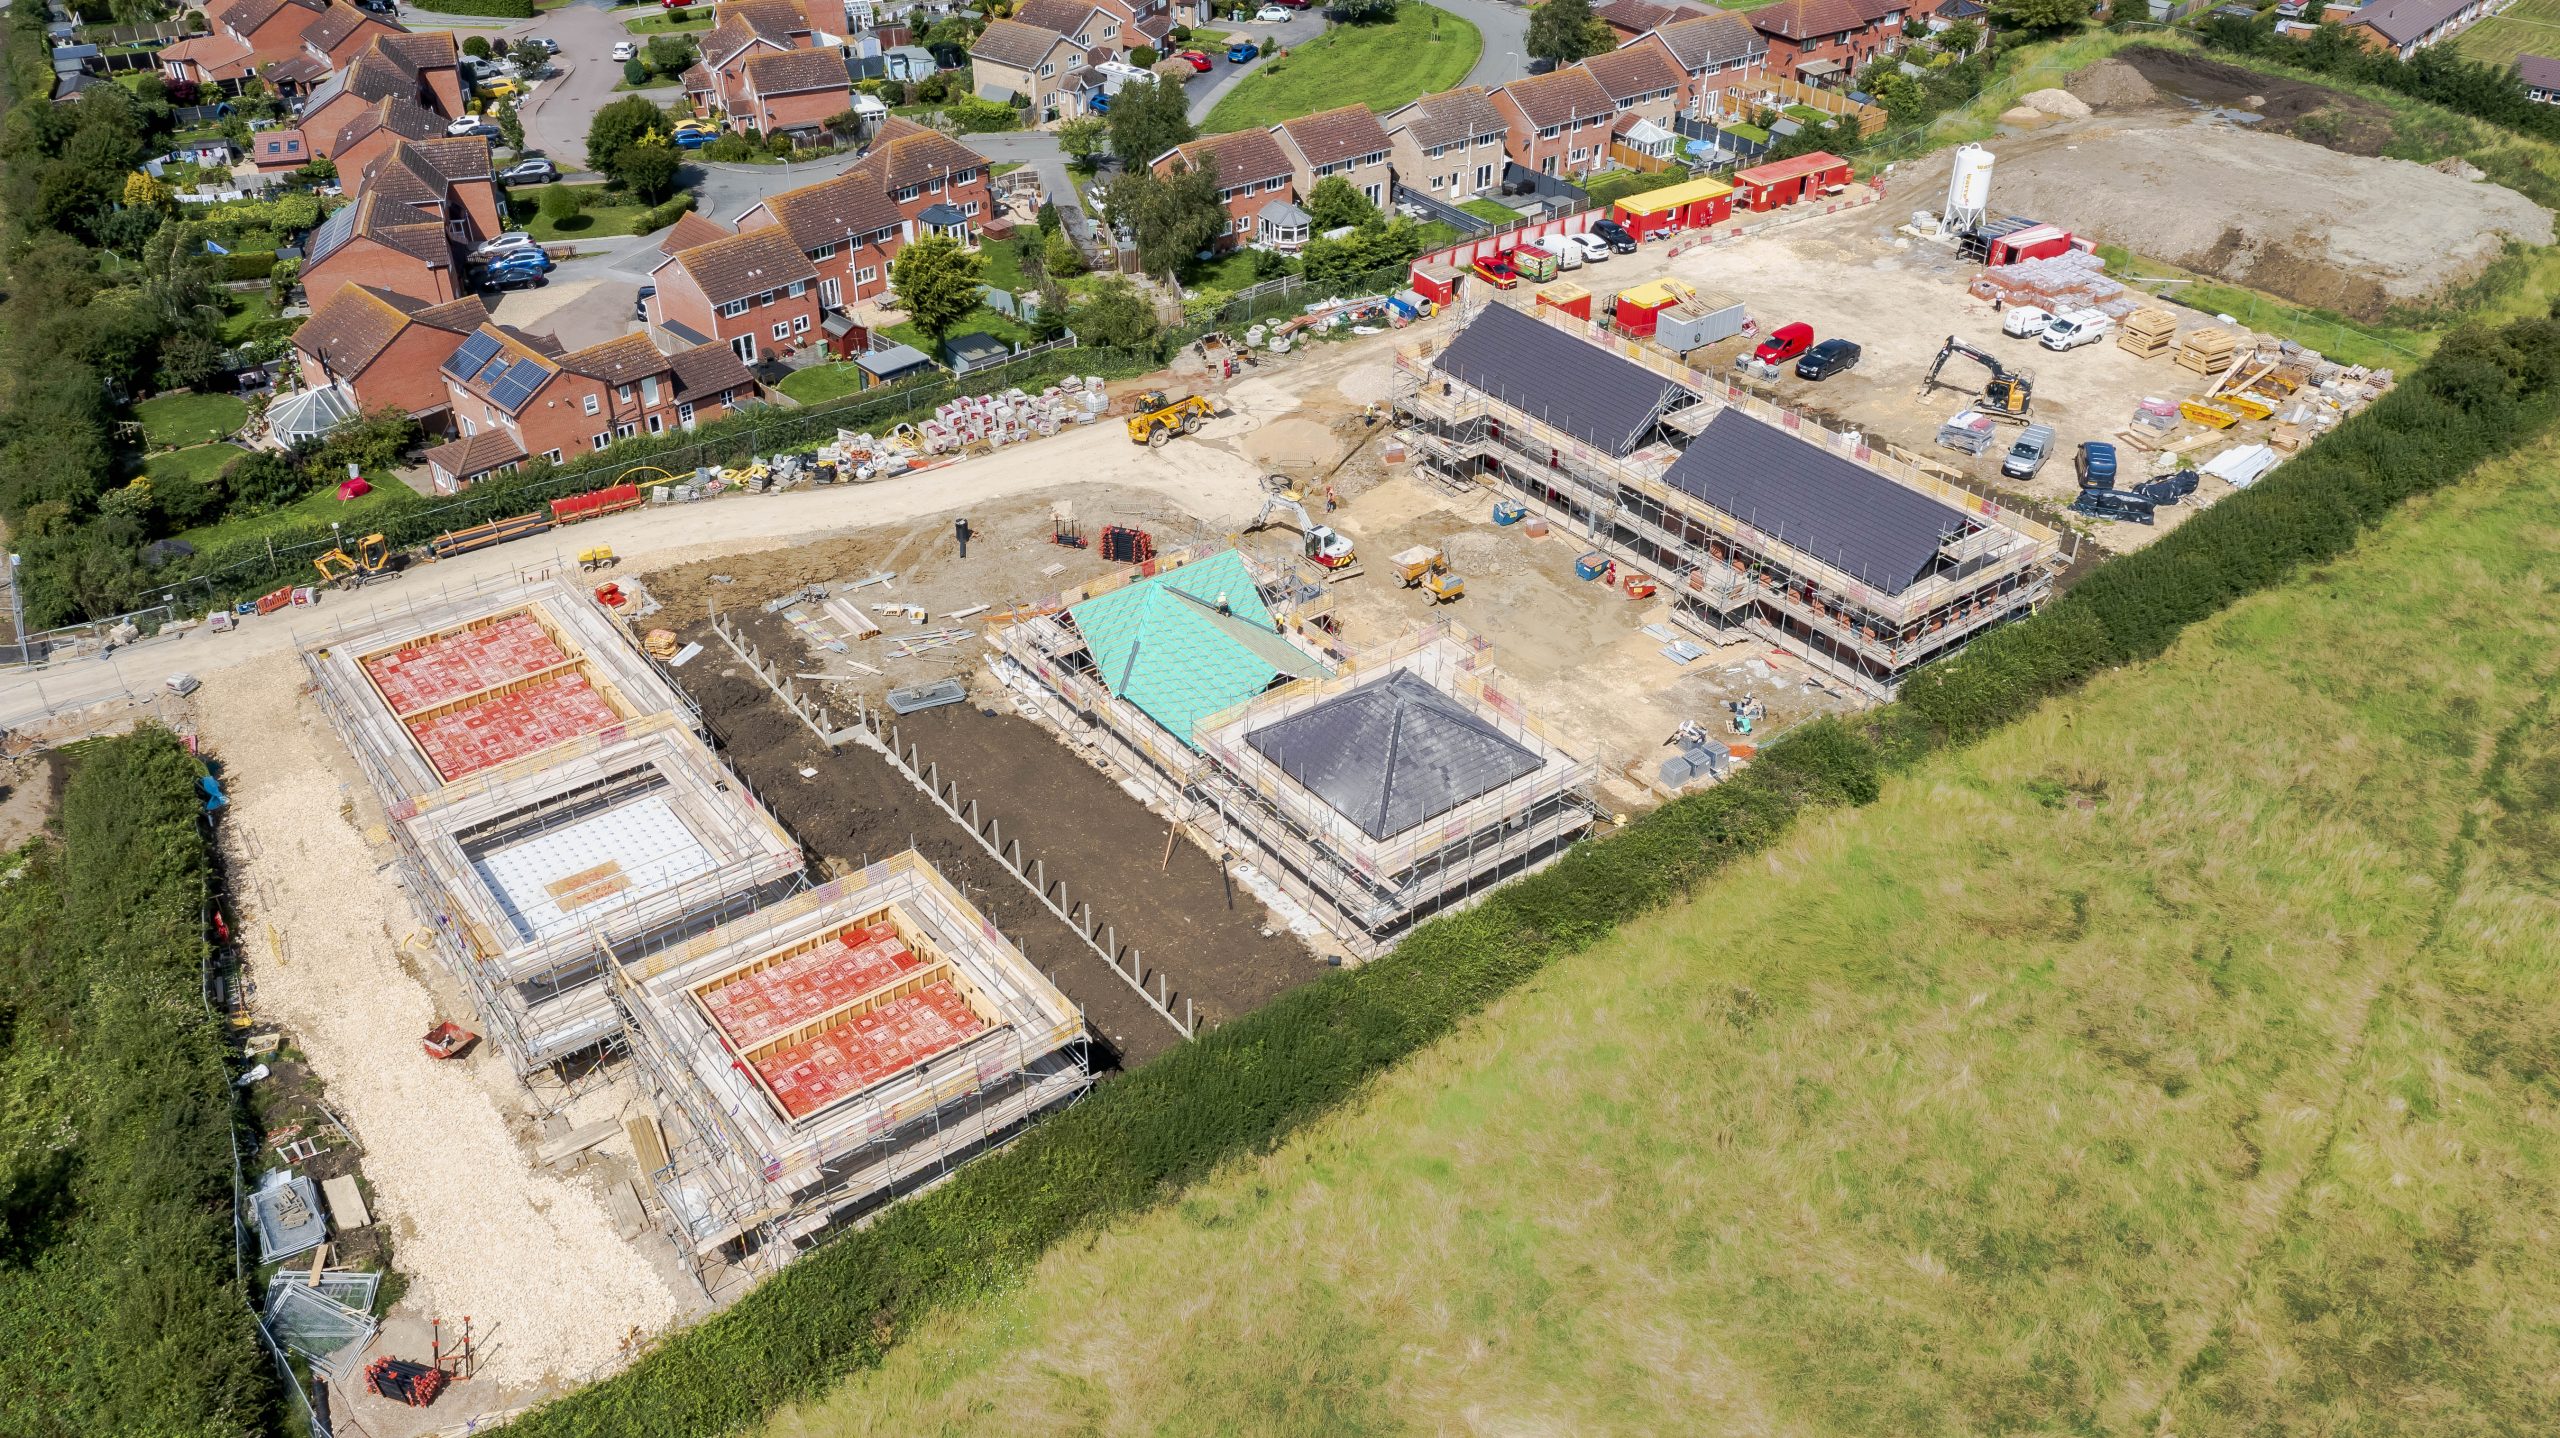 Work is progressing well on 16 new affordable homes in a Lincolnshire village